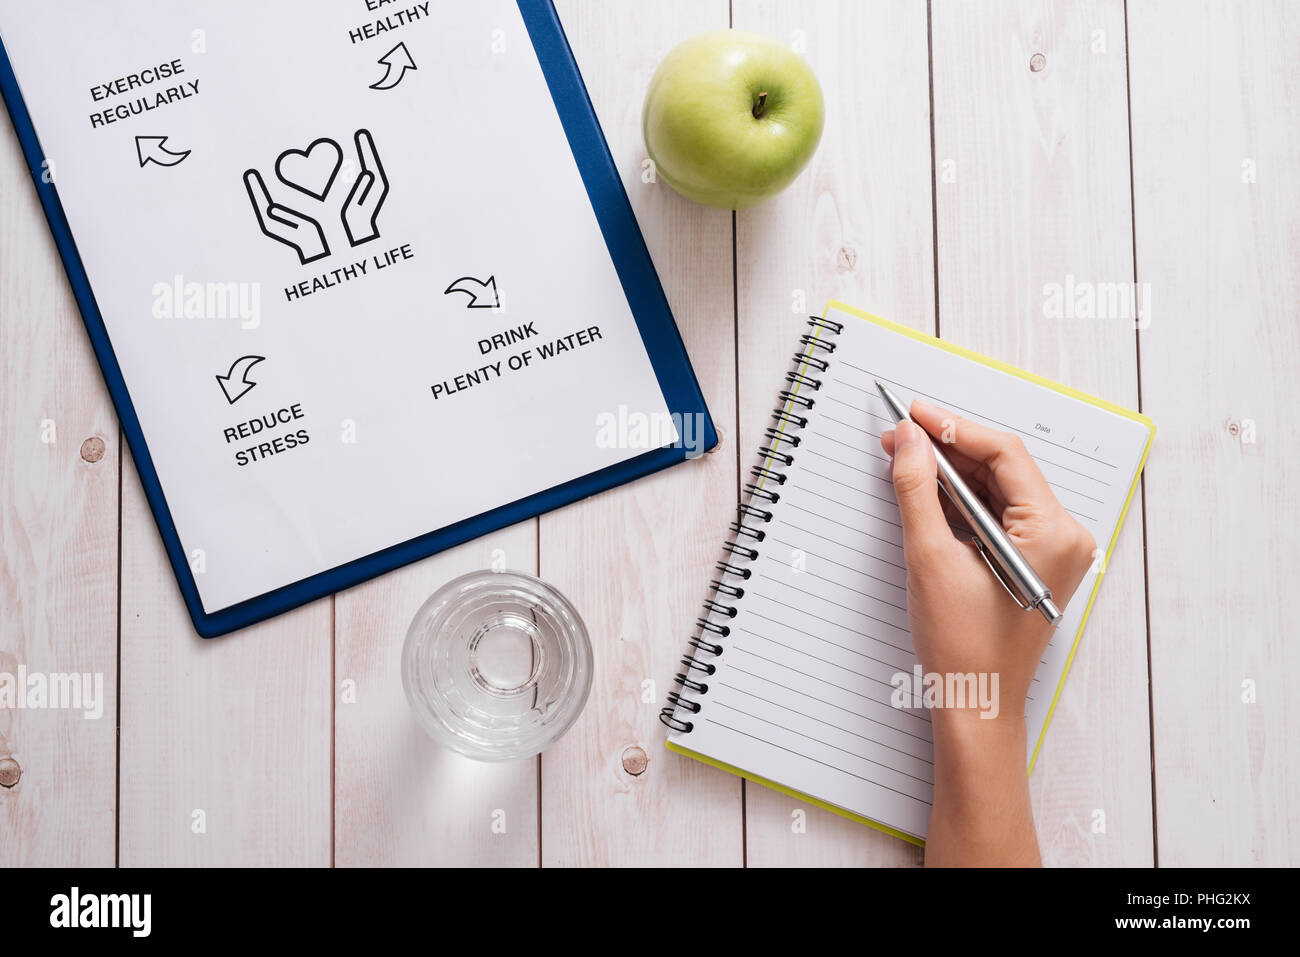 Top View Of A Meal Plan Concept On Wooden Desk Stock Photo